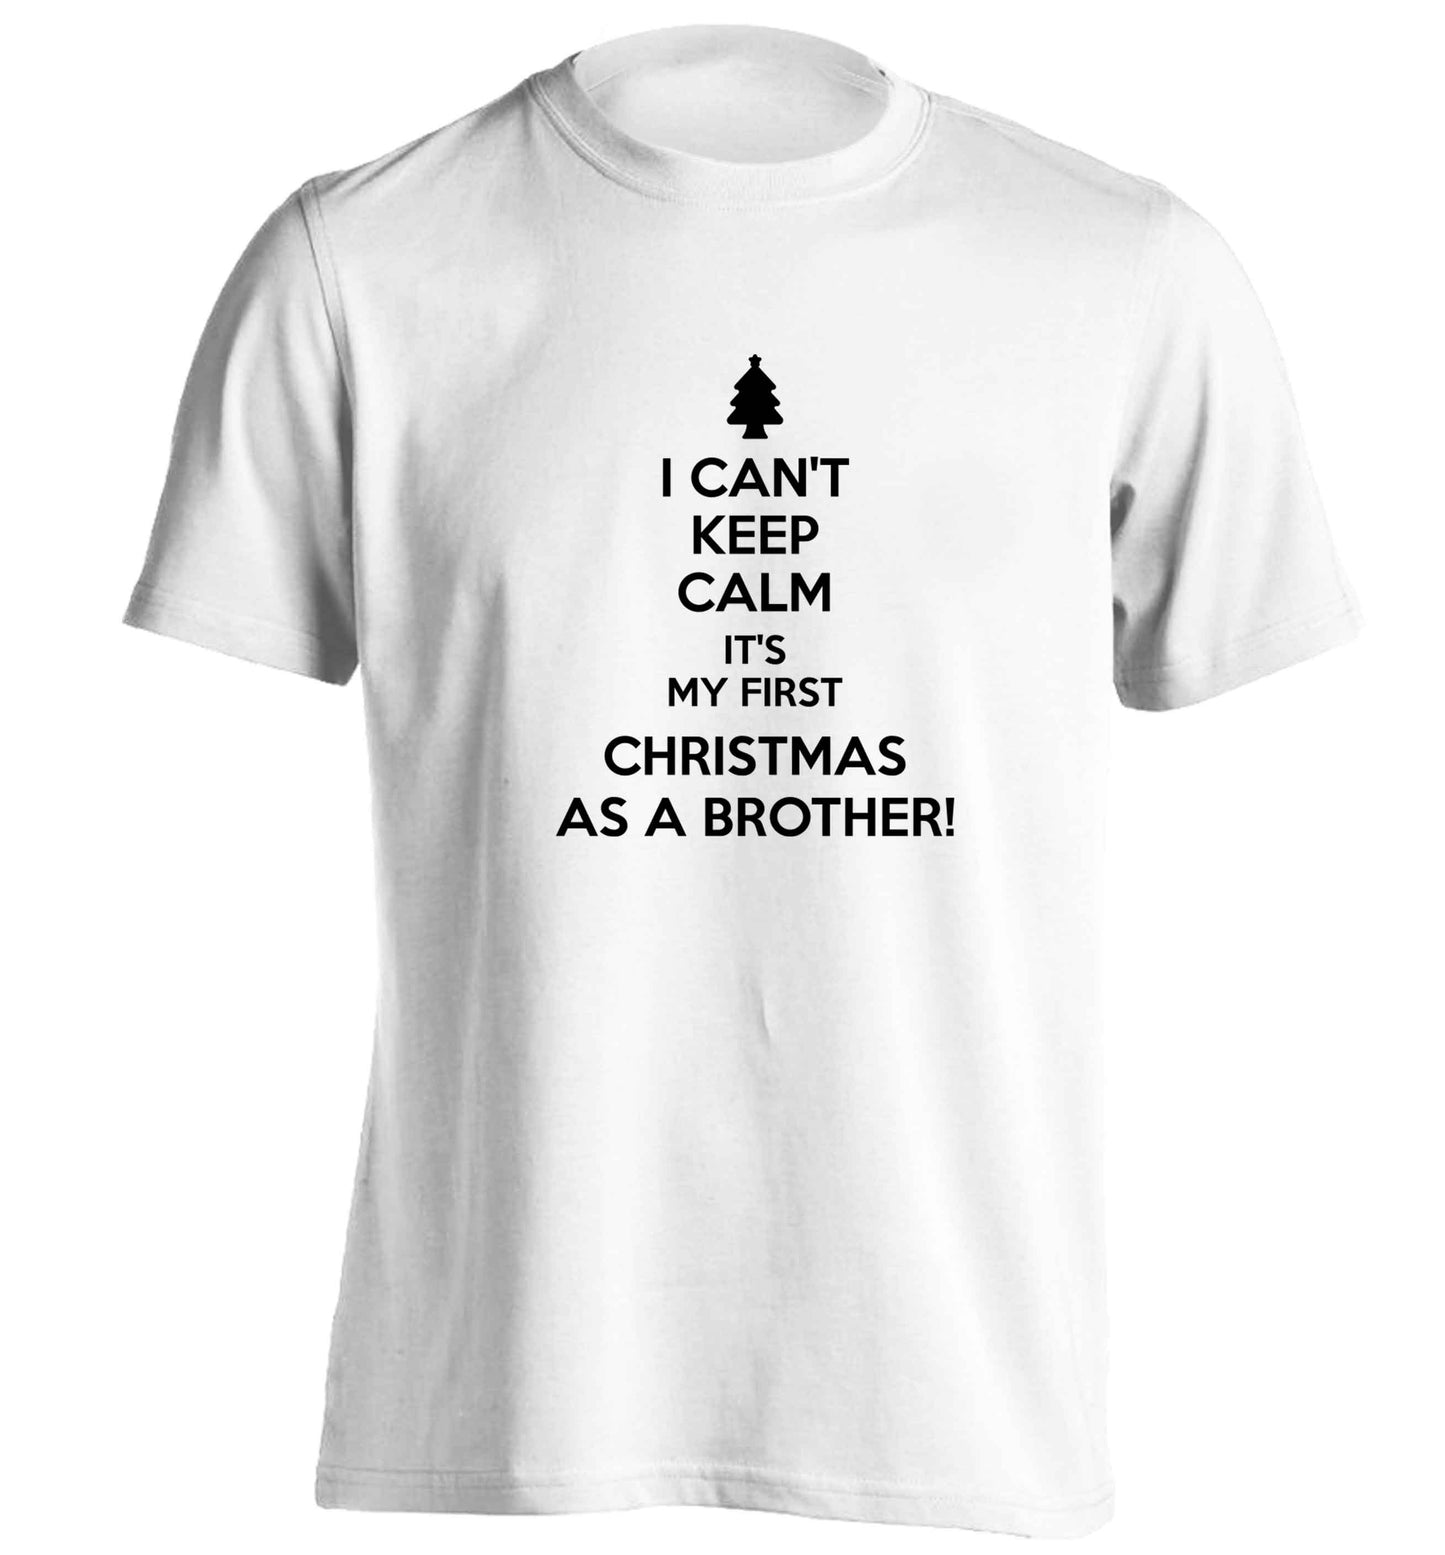 I can't keep calm it's my first Christmas as a brother! adults unisex white Tshirt 2XL